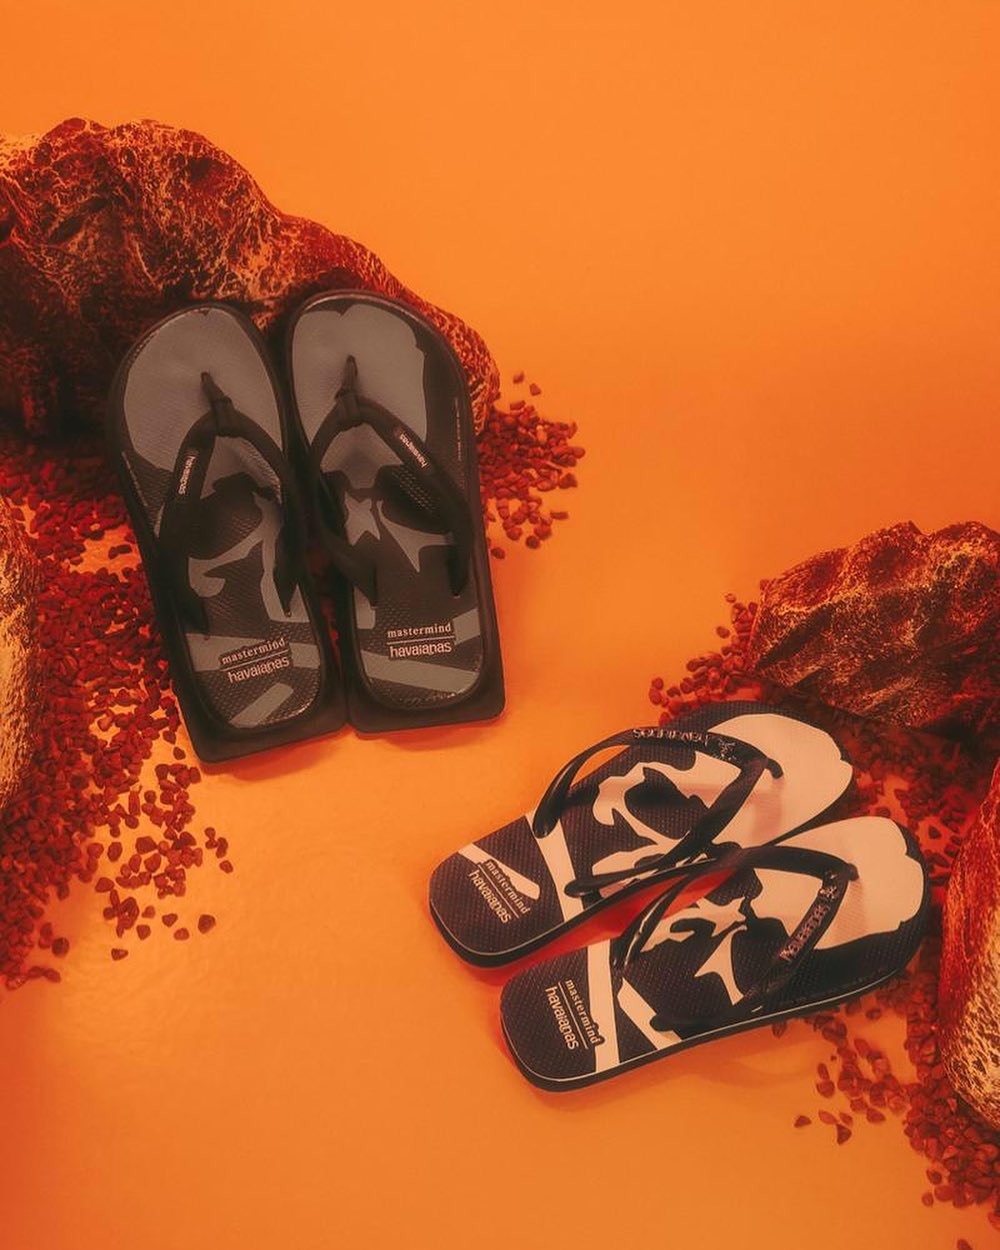 SVMOSCOW Online Concept Store - Вьетнамки Mastermind x Havaianas доступны эксклюзивно в SVMOSCOW

Mastermind x Havaianas shoes are available exclusively at SVMOSCOW

#svmoscow #mastermind #havaianas